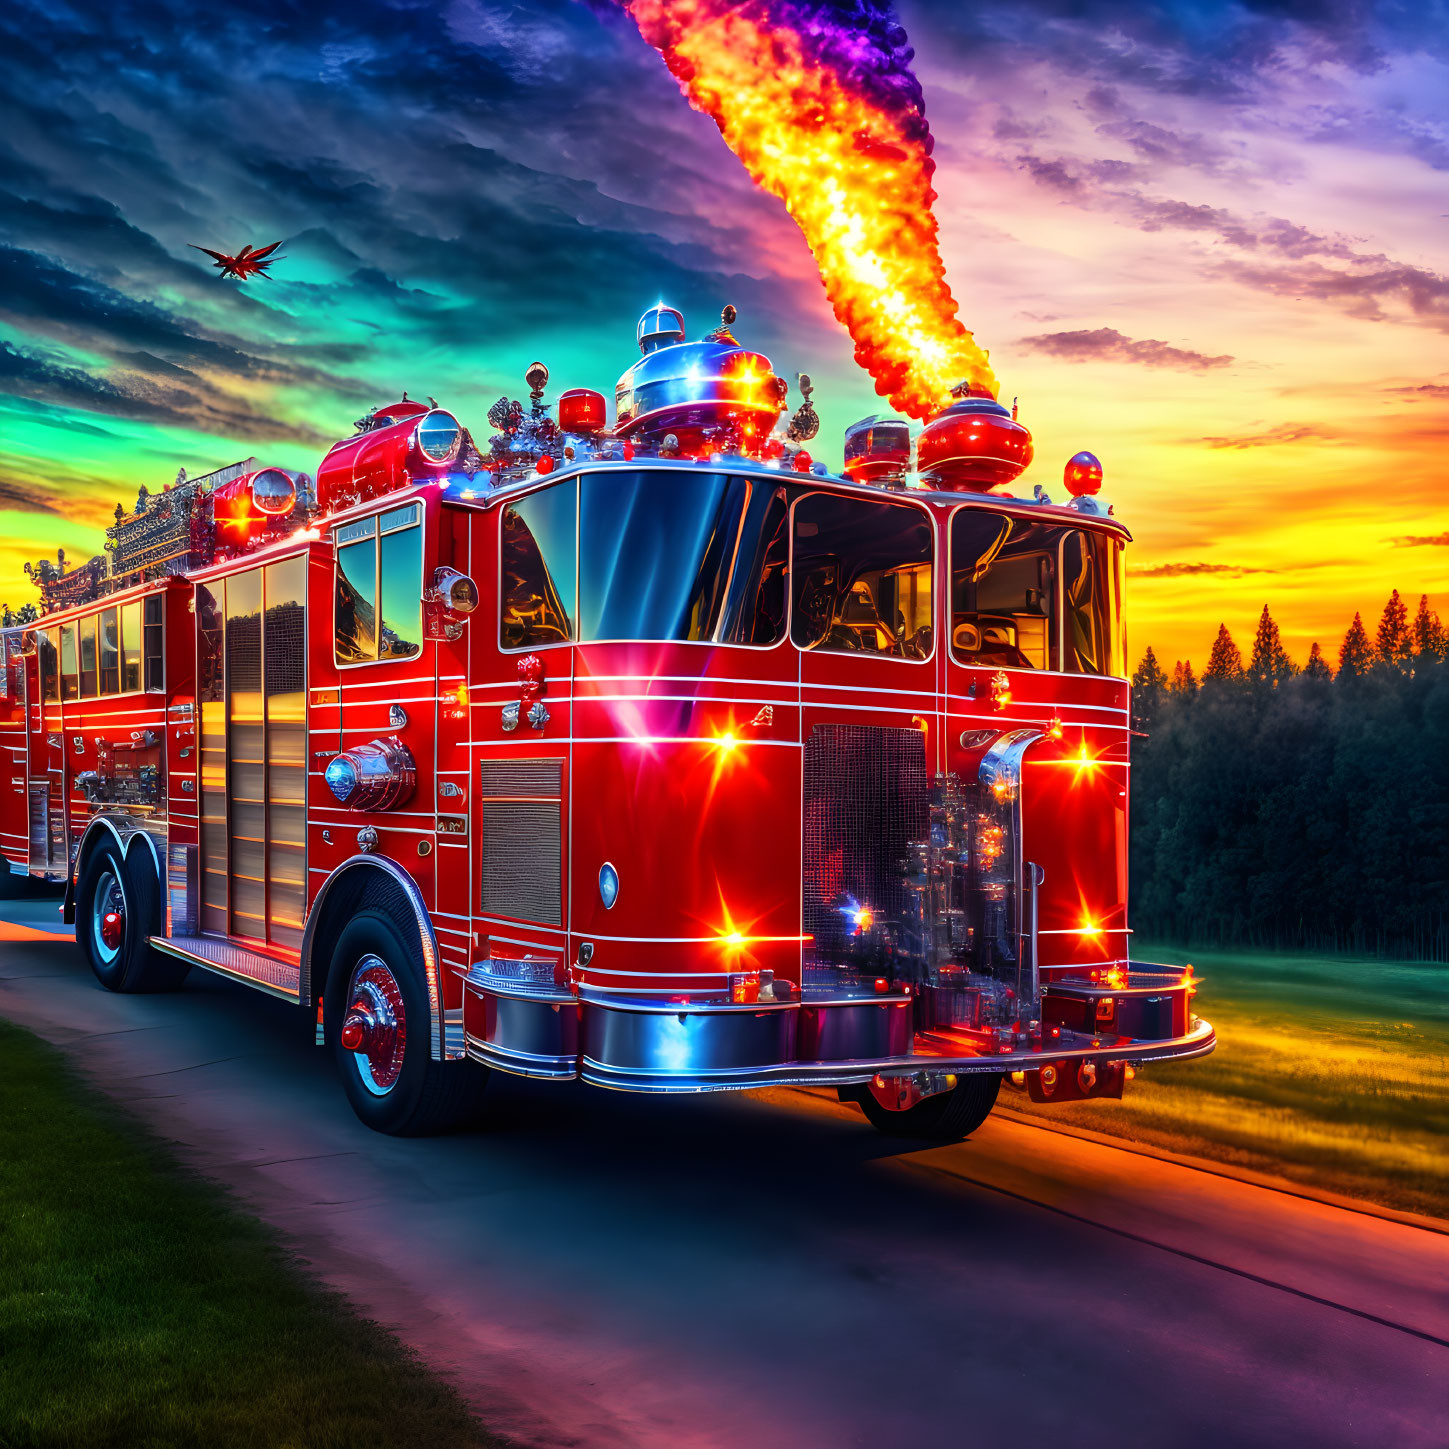 Vintage Red Firetruck Speeding at Sunset with Dramatic Sky